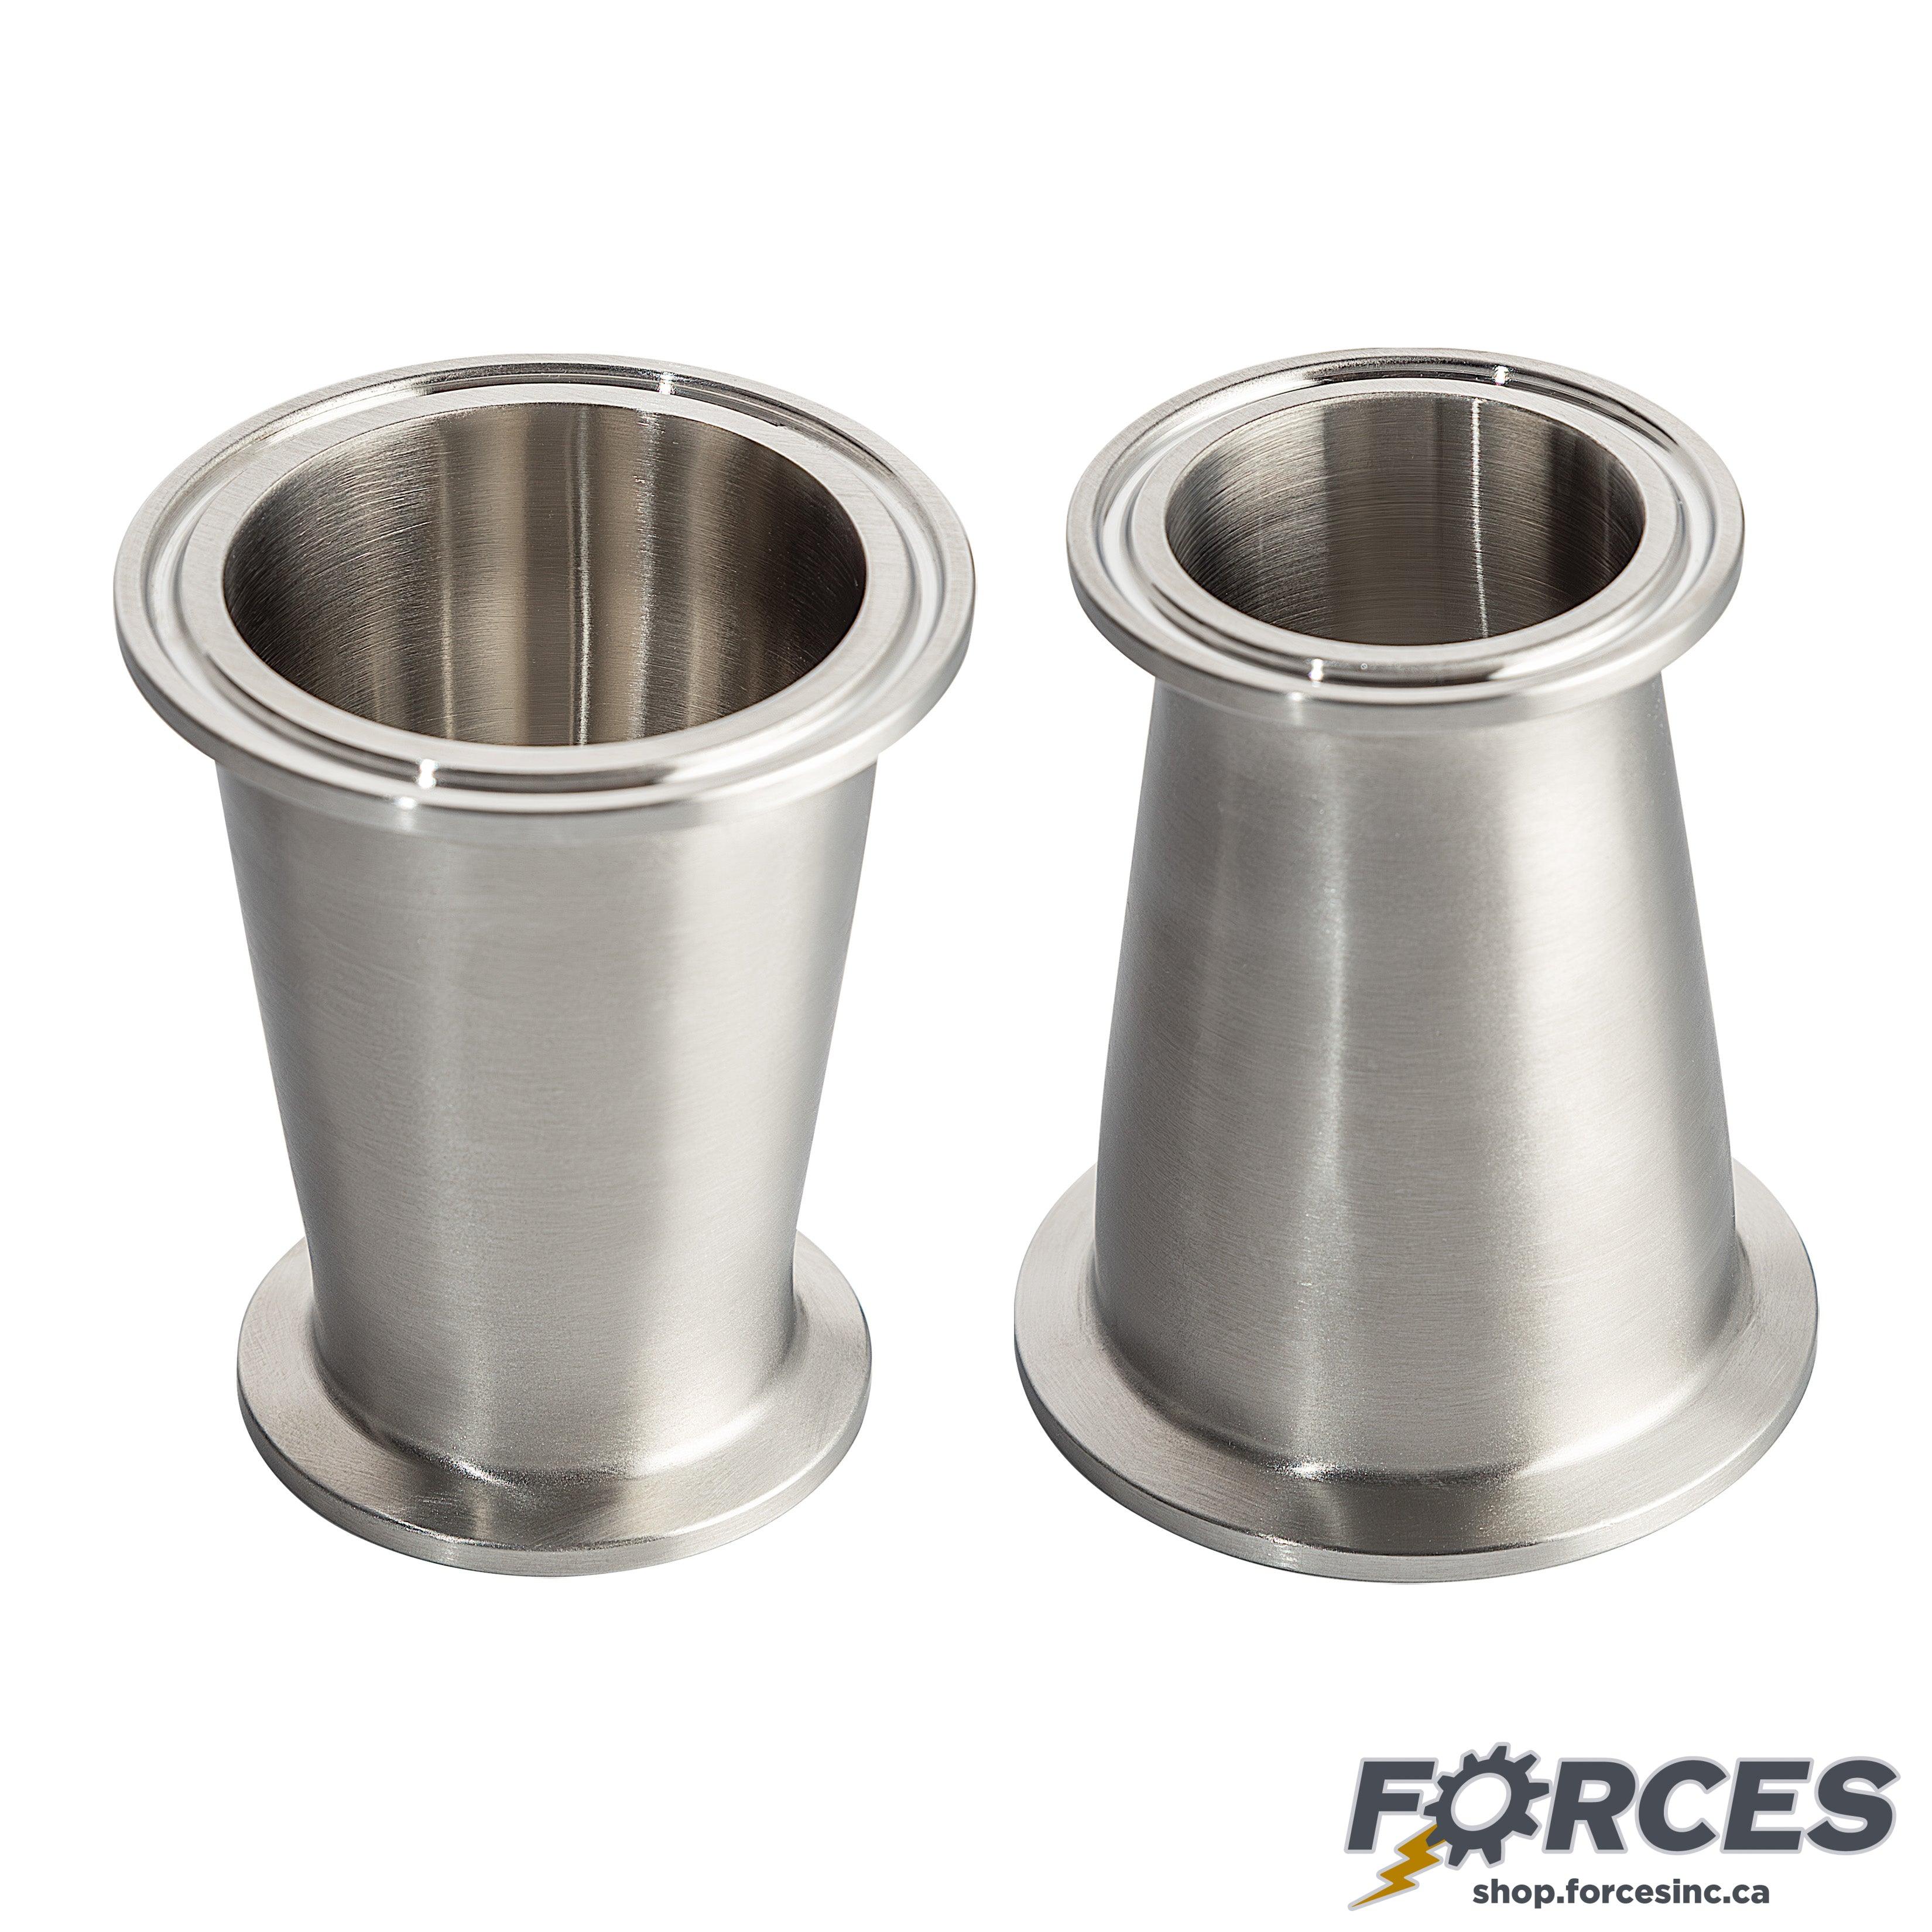 2-1/2" x 2" Tri-Clamp Concentric Reducer - Stainless Steel 316 - Forces Inc